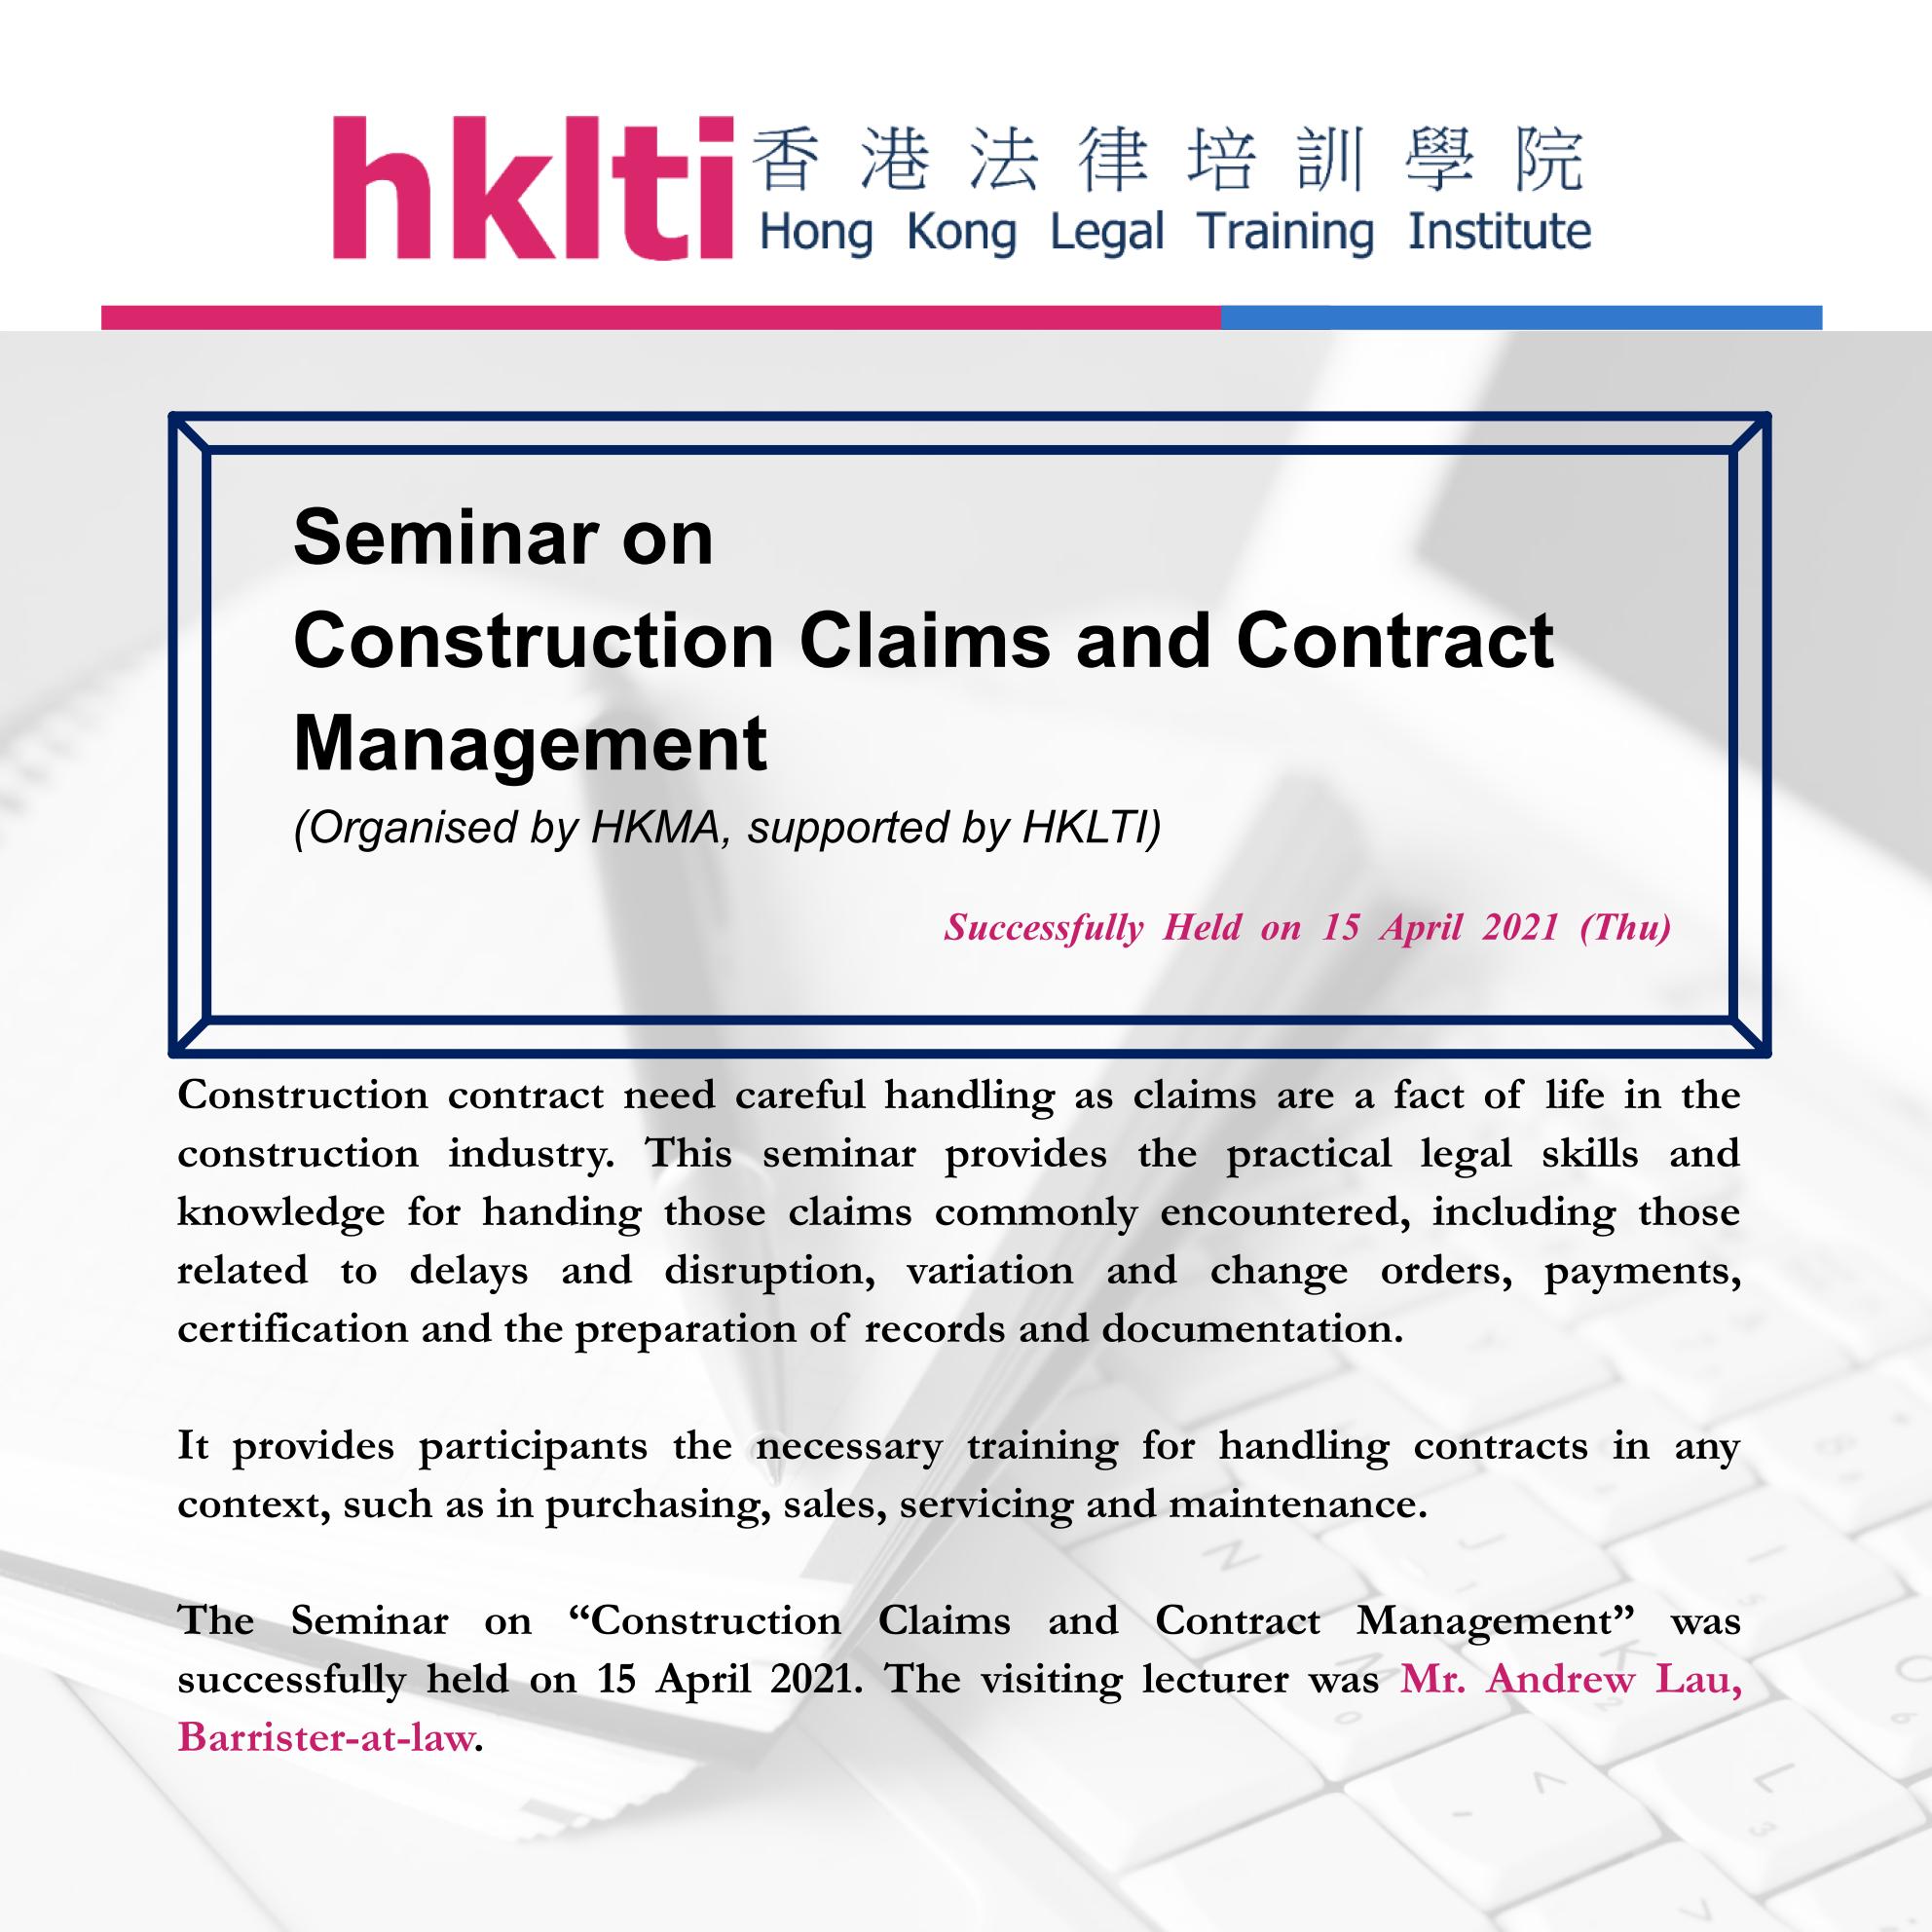 hklti hkma construction claims and contract management seminar report 20210415